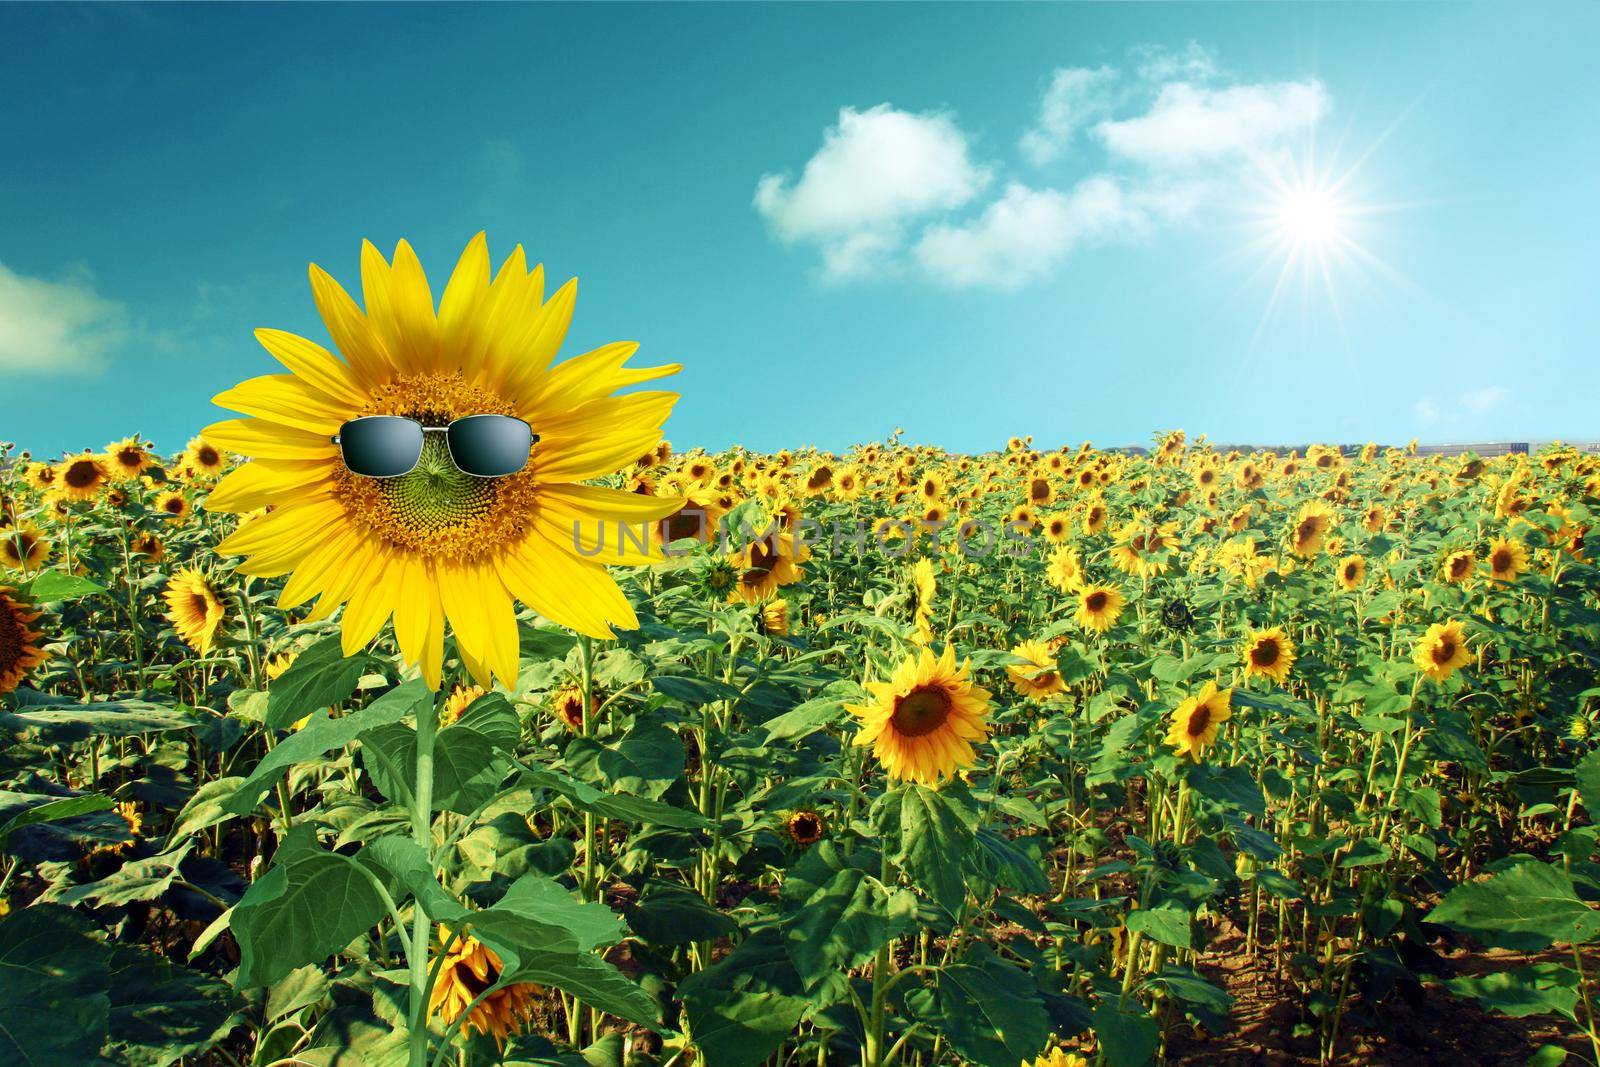 Funny sunflower with sunglasses on a blue sky by Taut